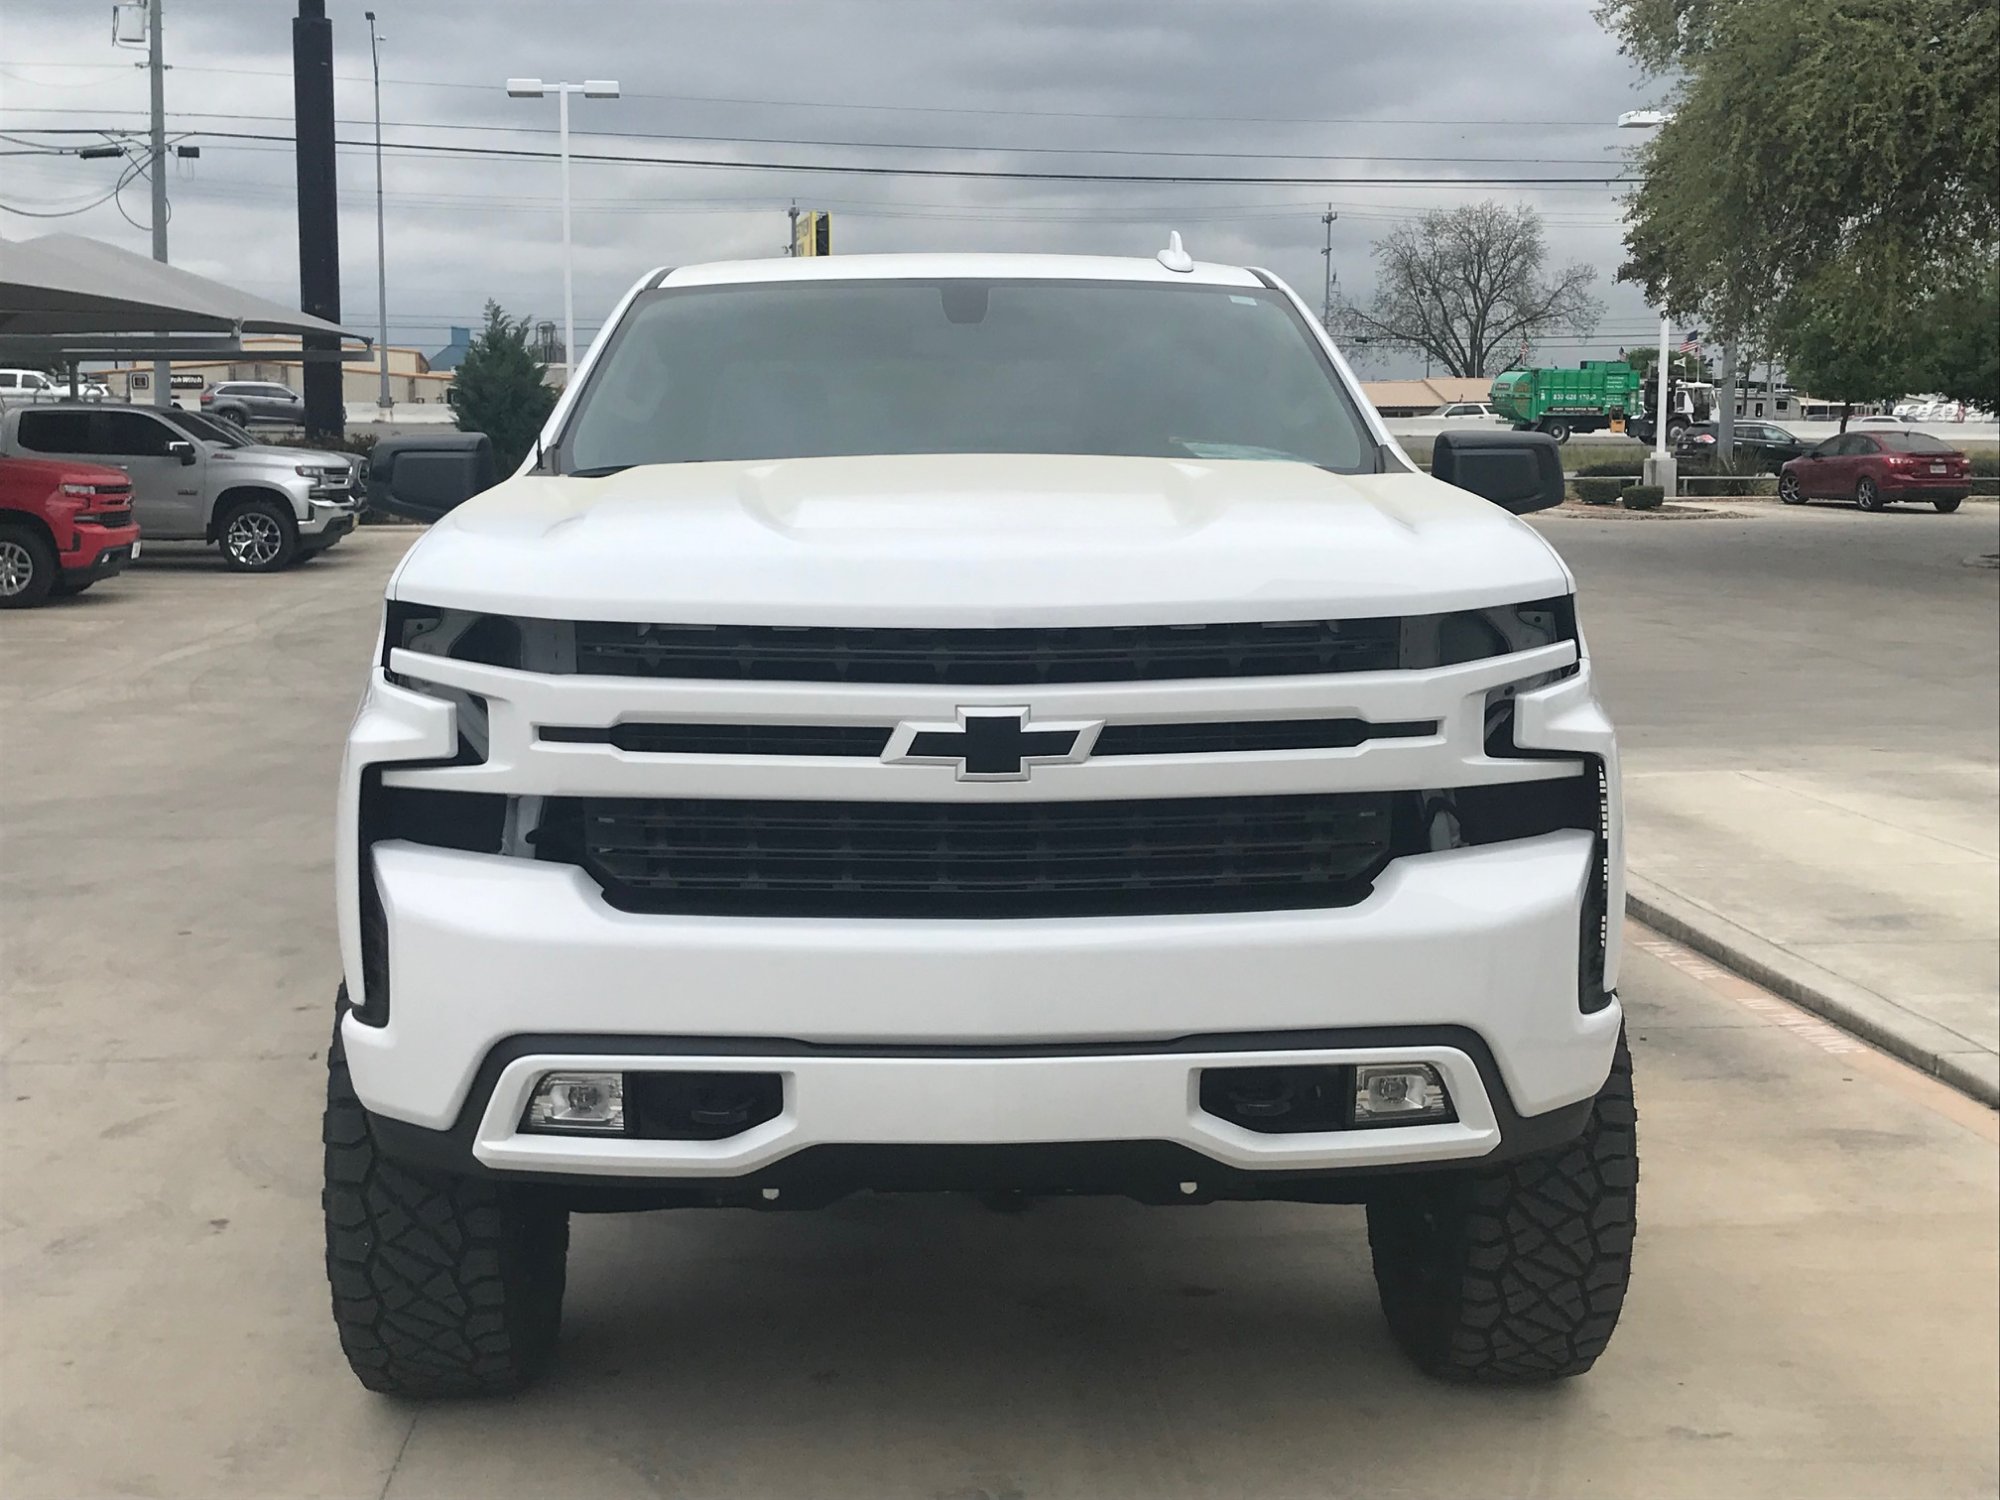 has anyone color matched trail boss bumpers yet 2019 2020 silverado sierra mods gm trucks com color matched trail boss bumpers yet